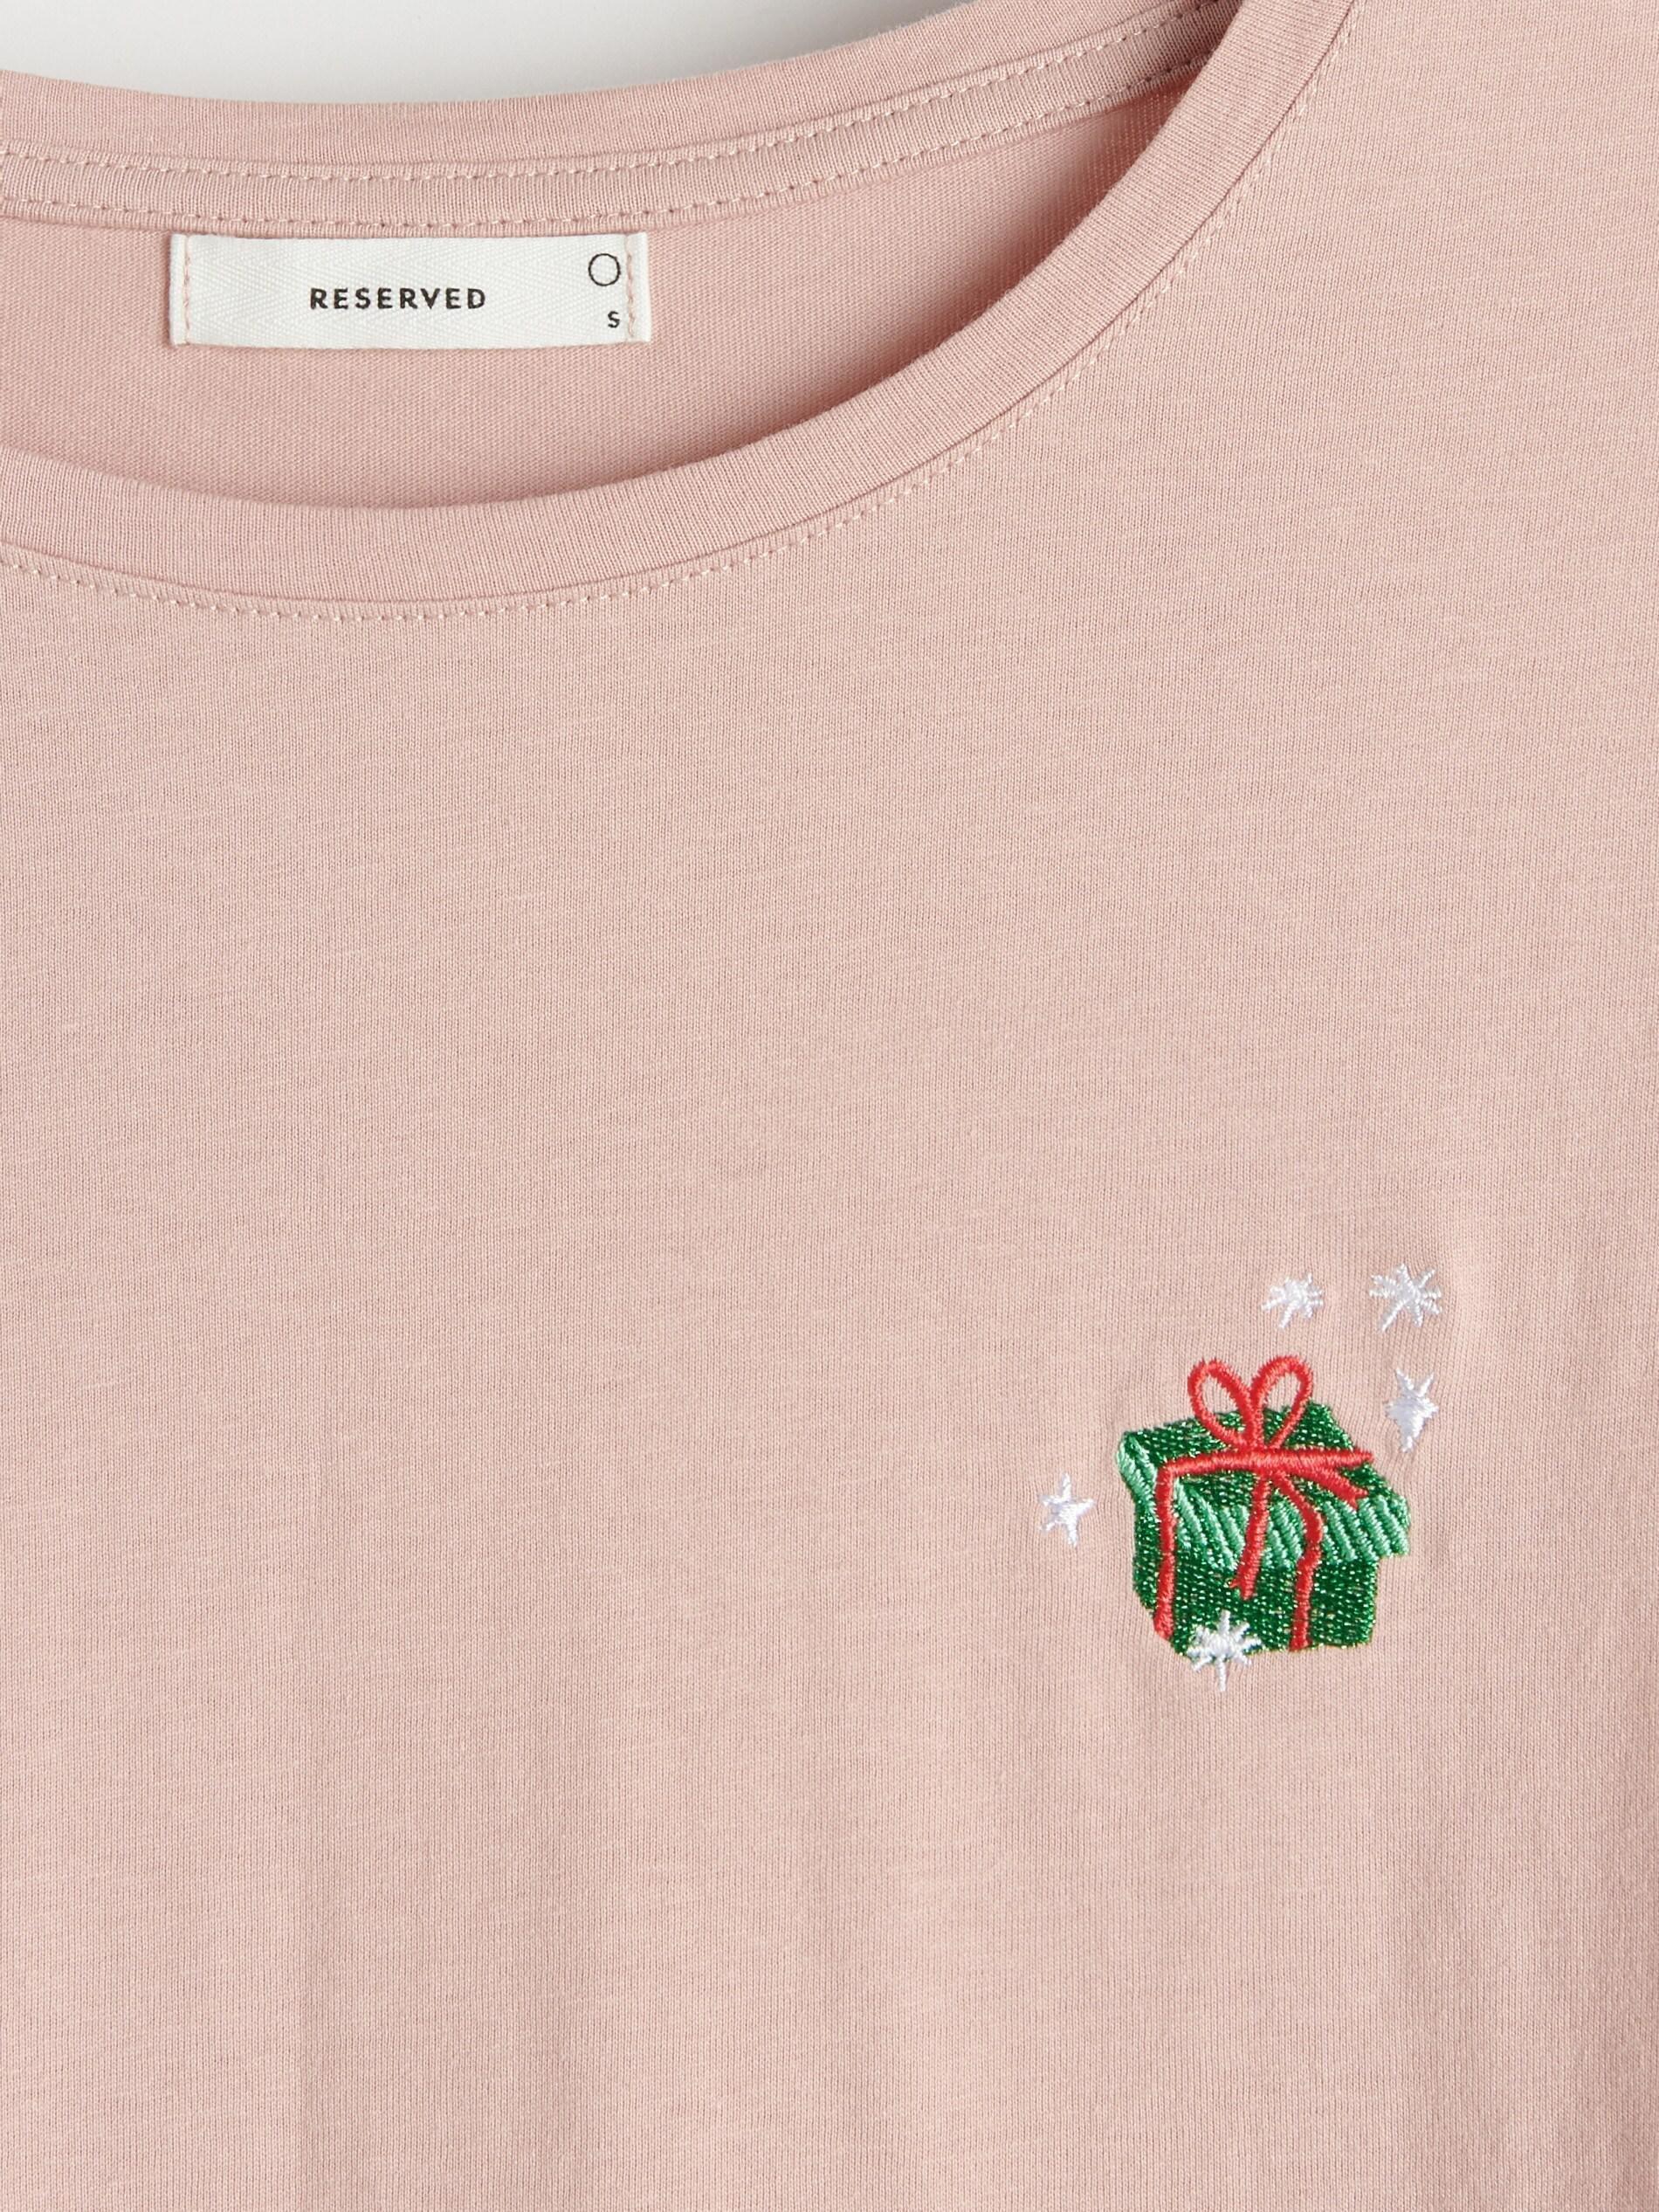 Reserved - Pastel Pink T-Shirt With A Festive Motif, Women